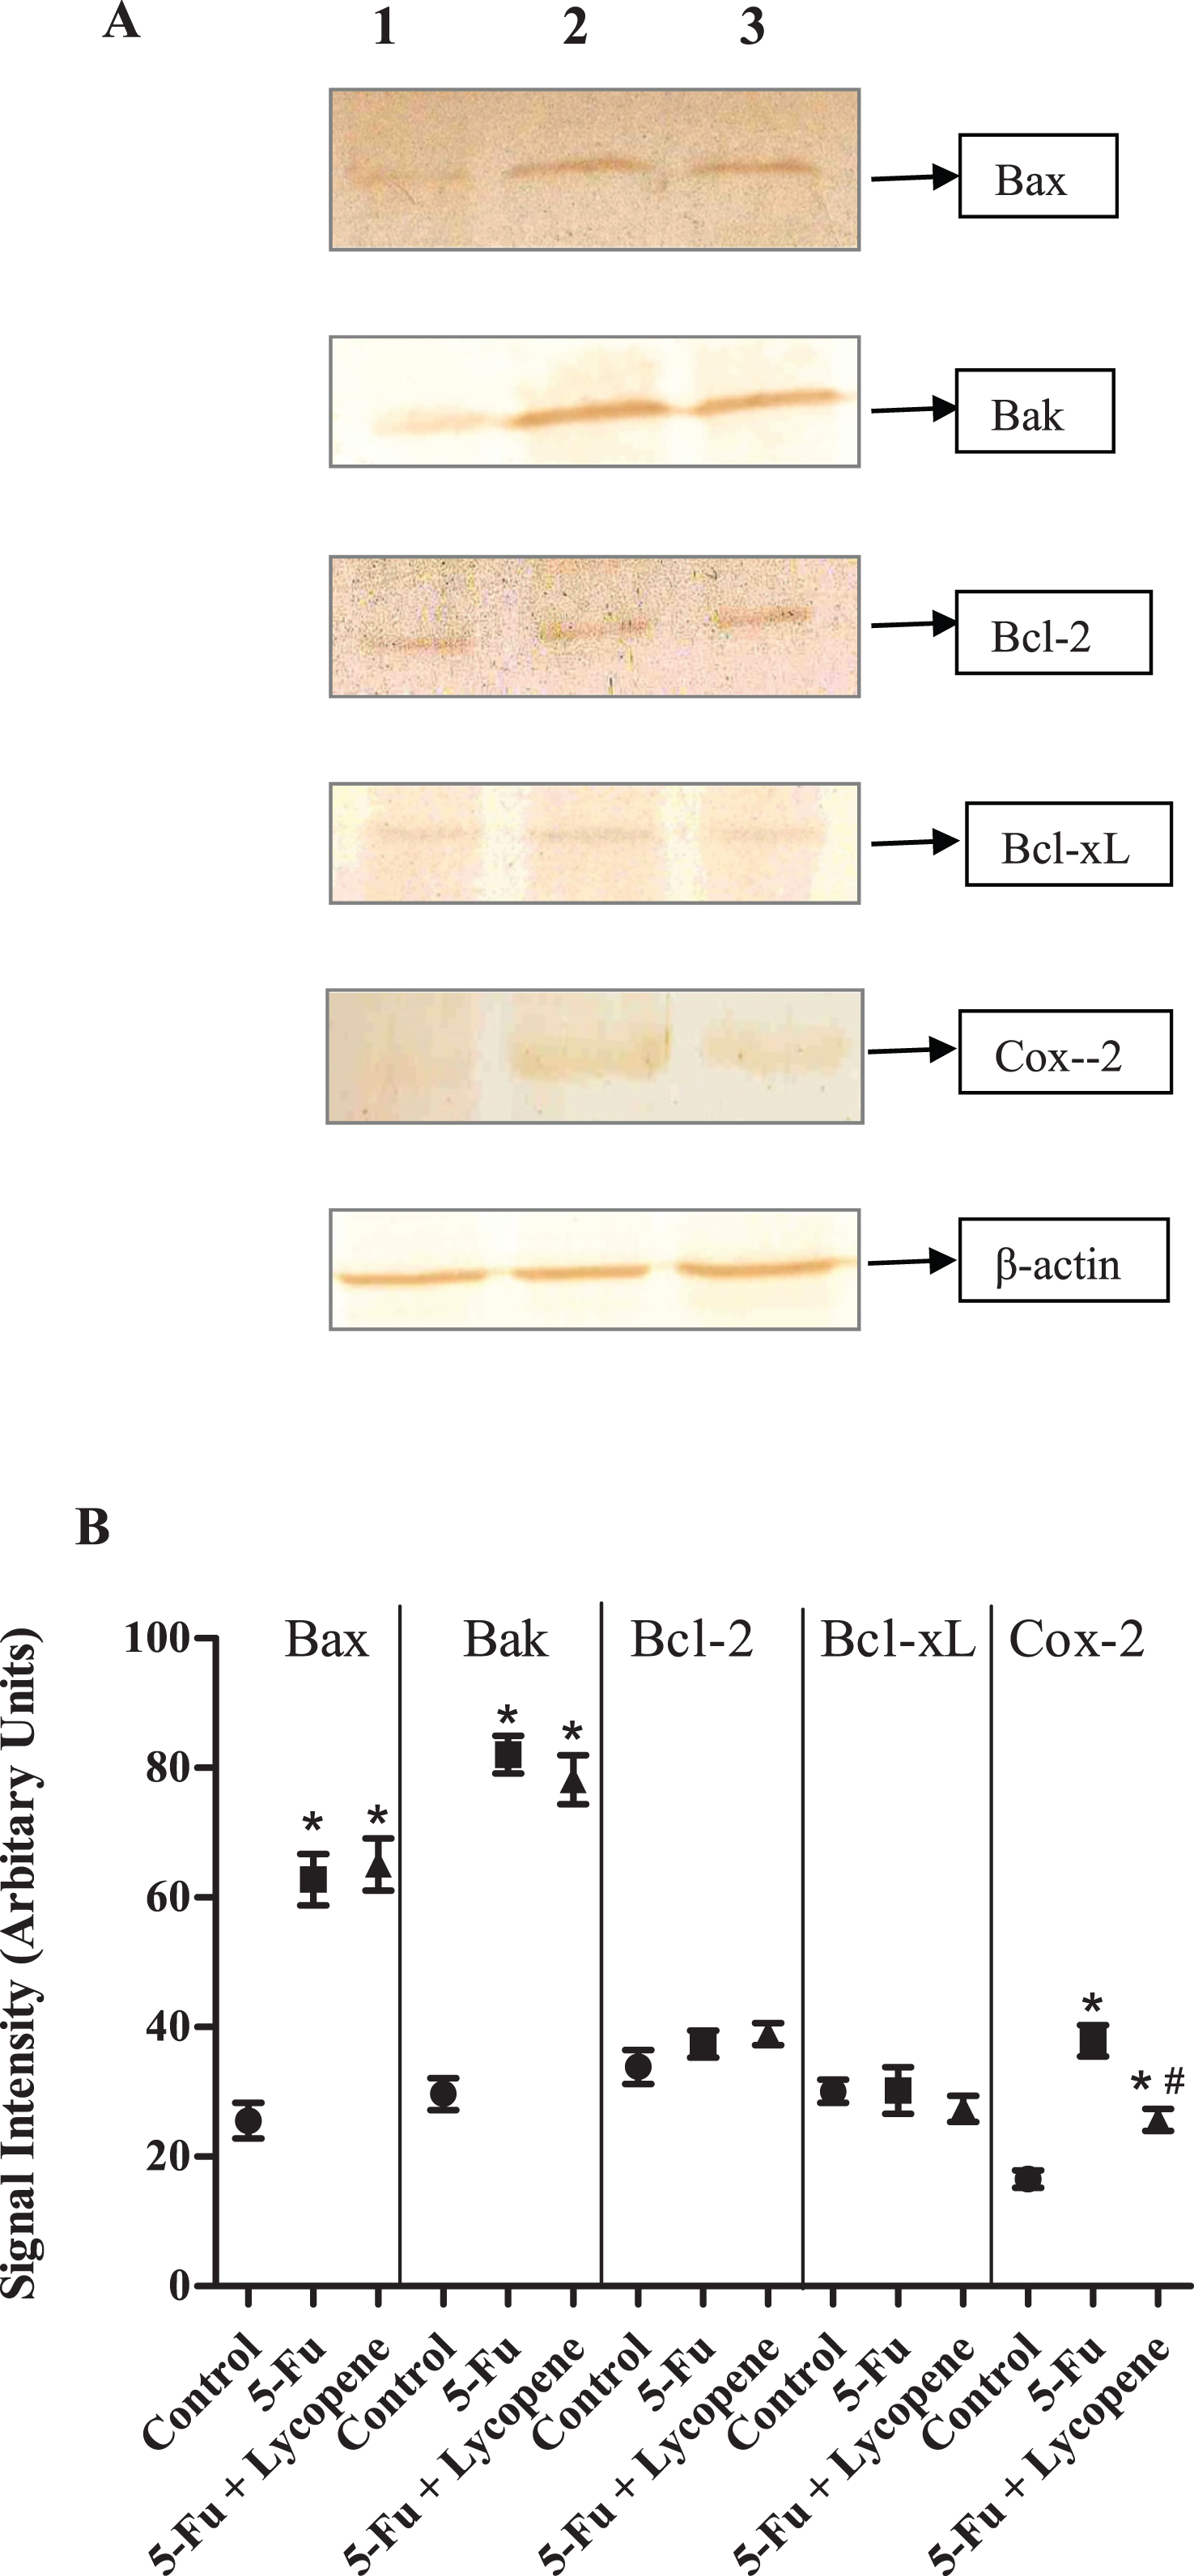 (A) Western blot for protein expression of various pro-apoptotic, anti-apoptotic and anti-inflammatory marker genes in control (Lane 1), 5-Fu (Lane 2) and 5-Fu + Lycopene (Lane 3) treated rats. 100 μg protein was resolved on 12% SDS-PAGE and transferred to PVDF membrane for western blotting. (B) Densitometric scan of the corresponding blots as represented in arbitrary units. Values represented as Mean ± SD. *Significantly different from control group;  # Significantly different from 5-Fu alone group.